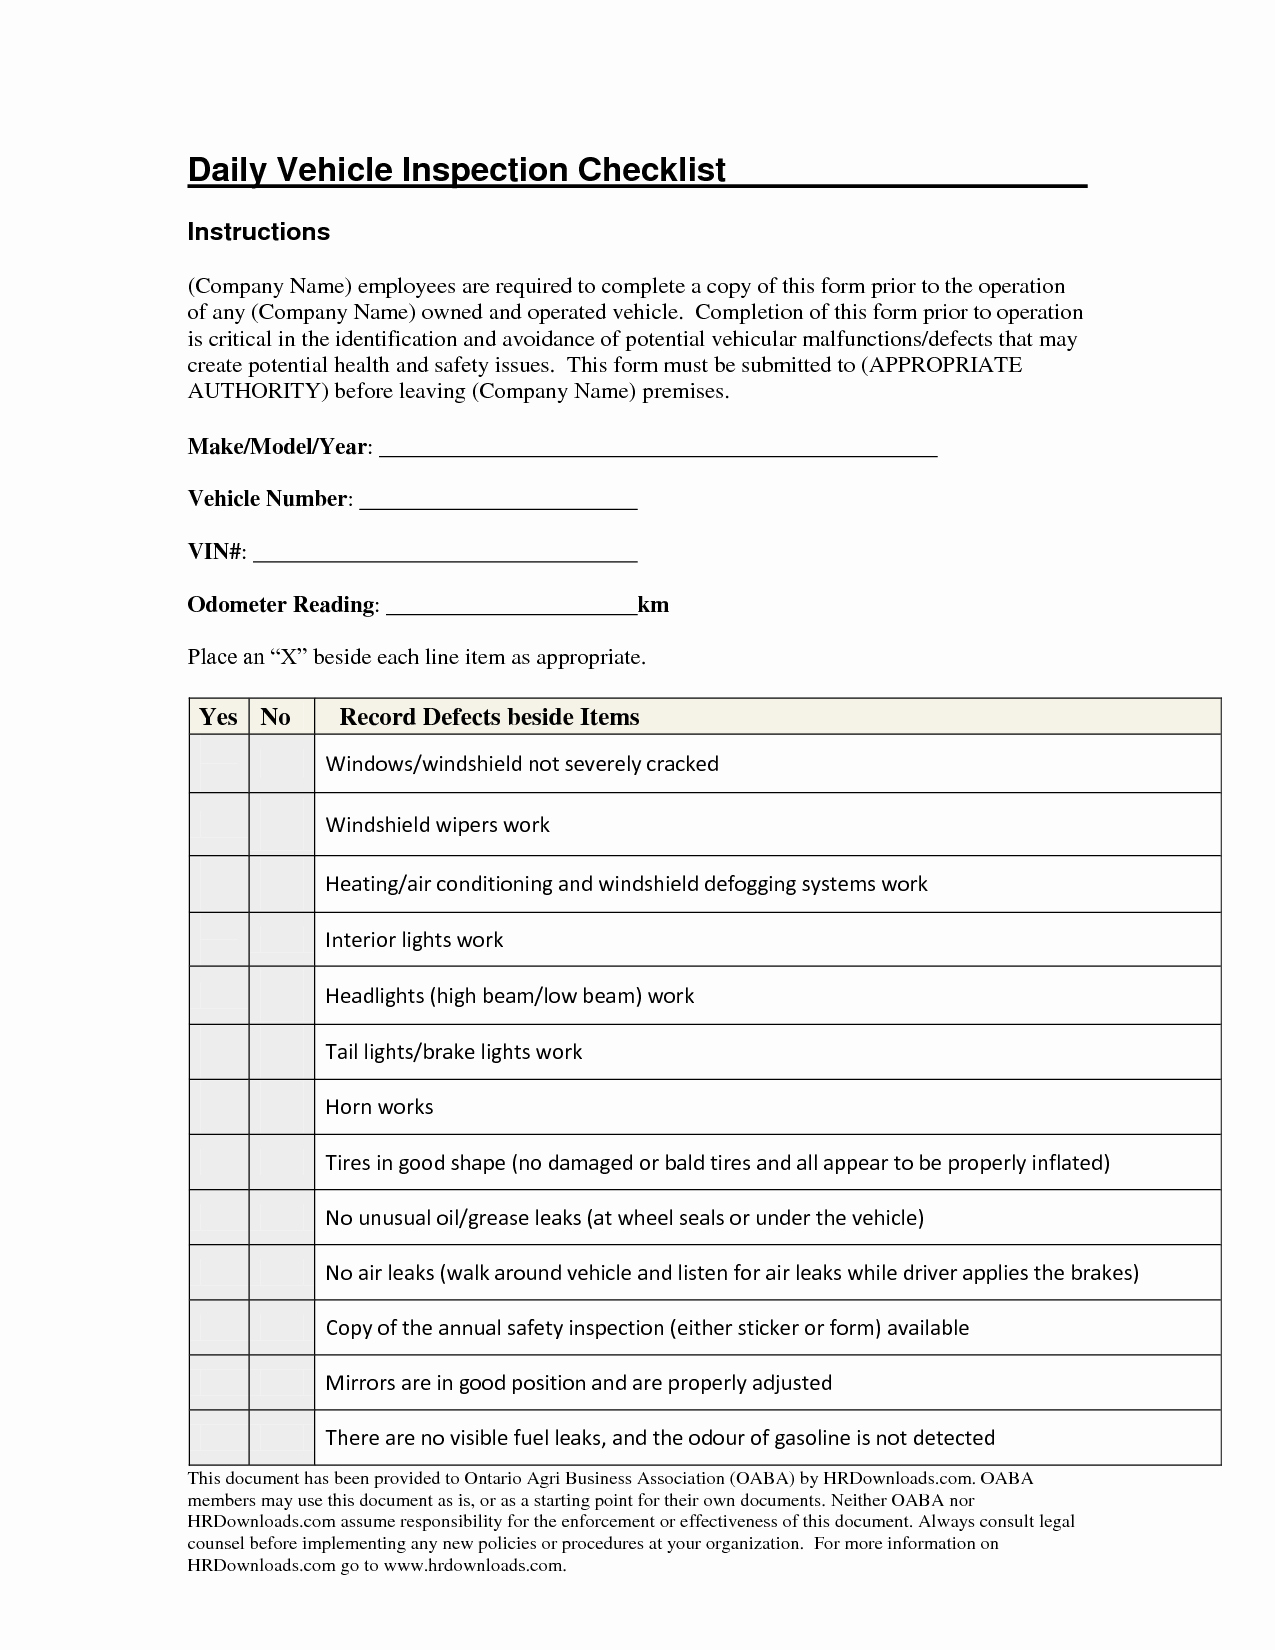 Vehicle Inspection Checklist Template Luxury Daily Vehicle Inspection Checklist form Image Gallery